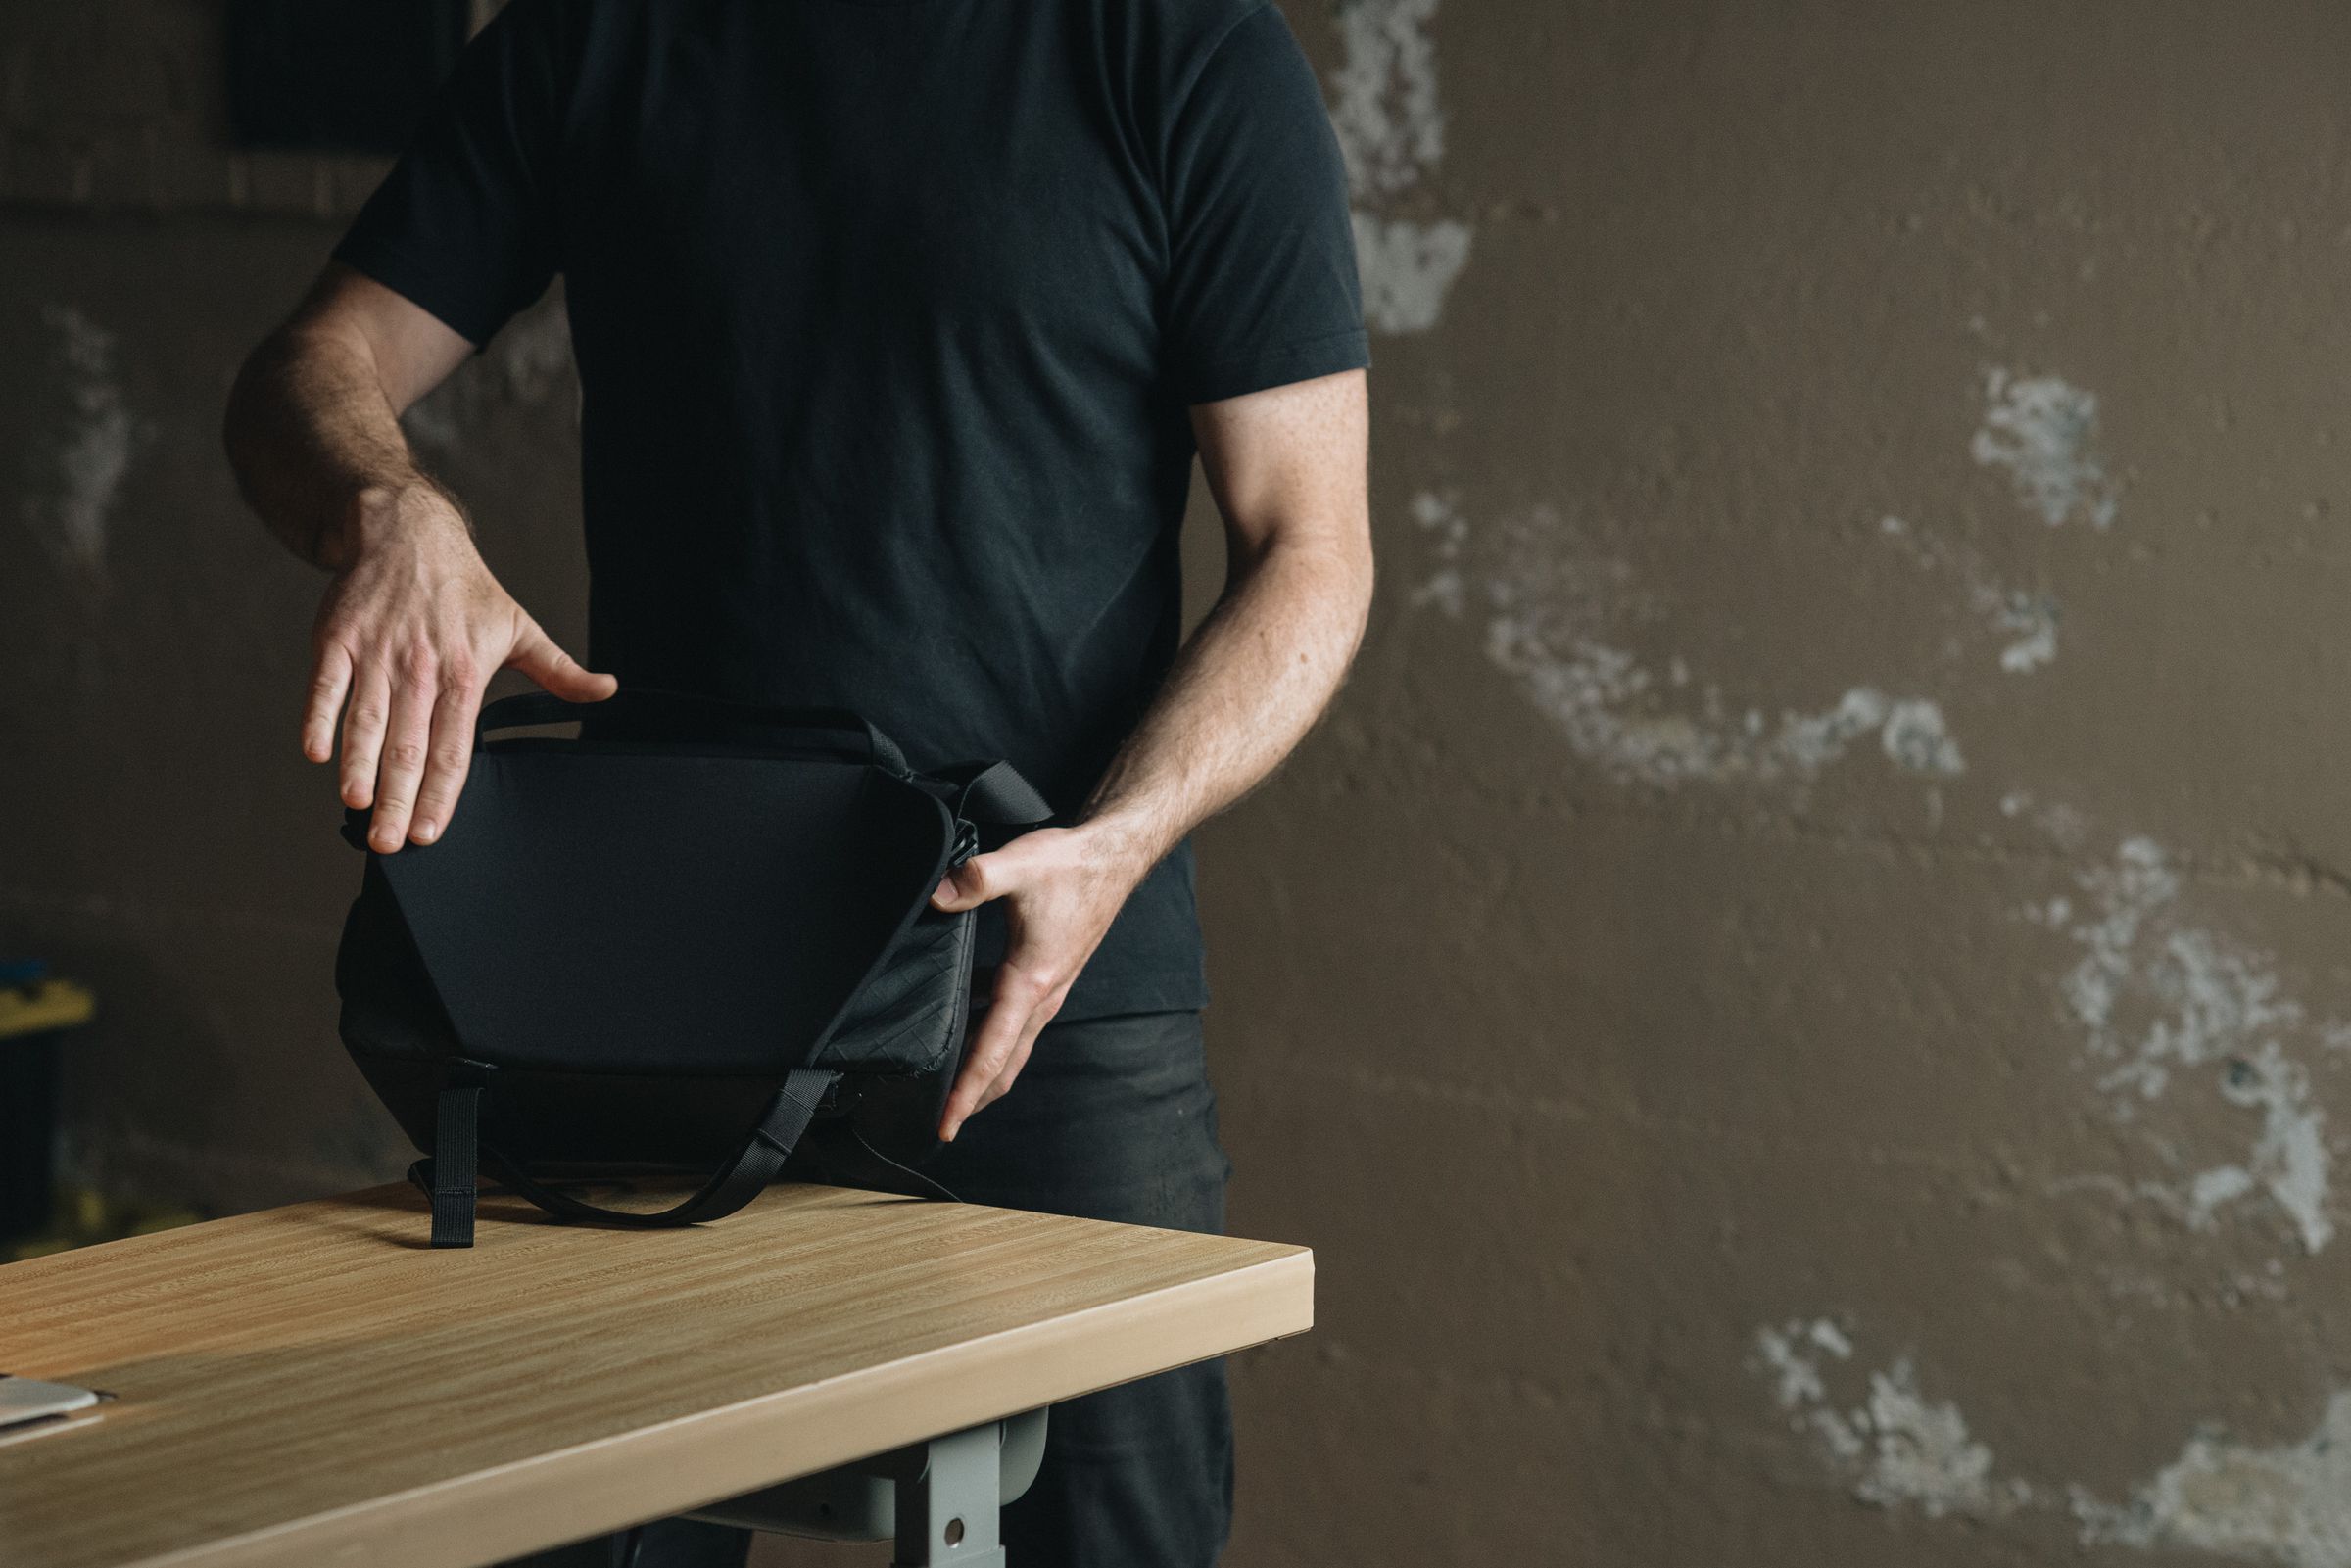 A man demonstrating the flexible, winged back panel of the Moment Rugged Camera Sling bag on a wooden table.